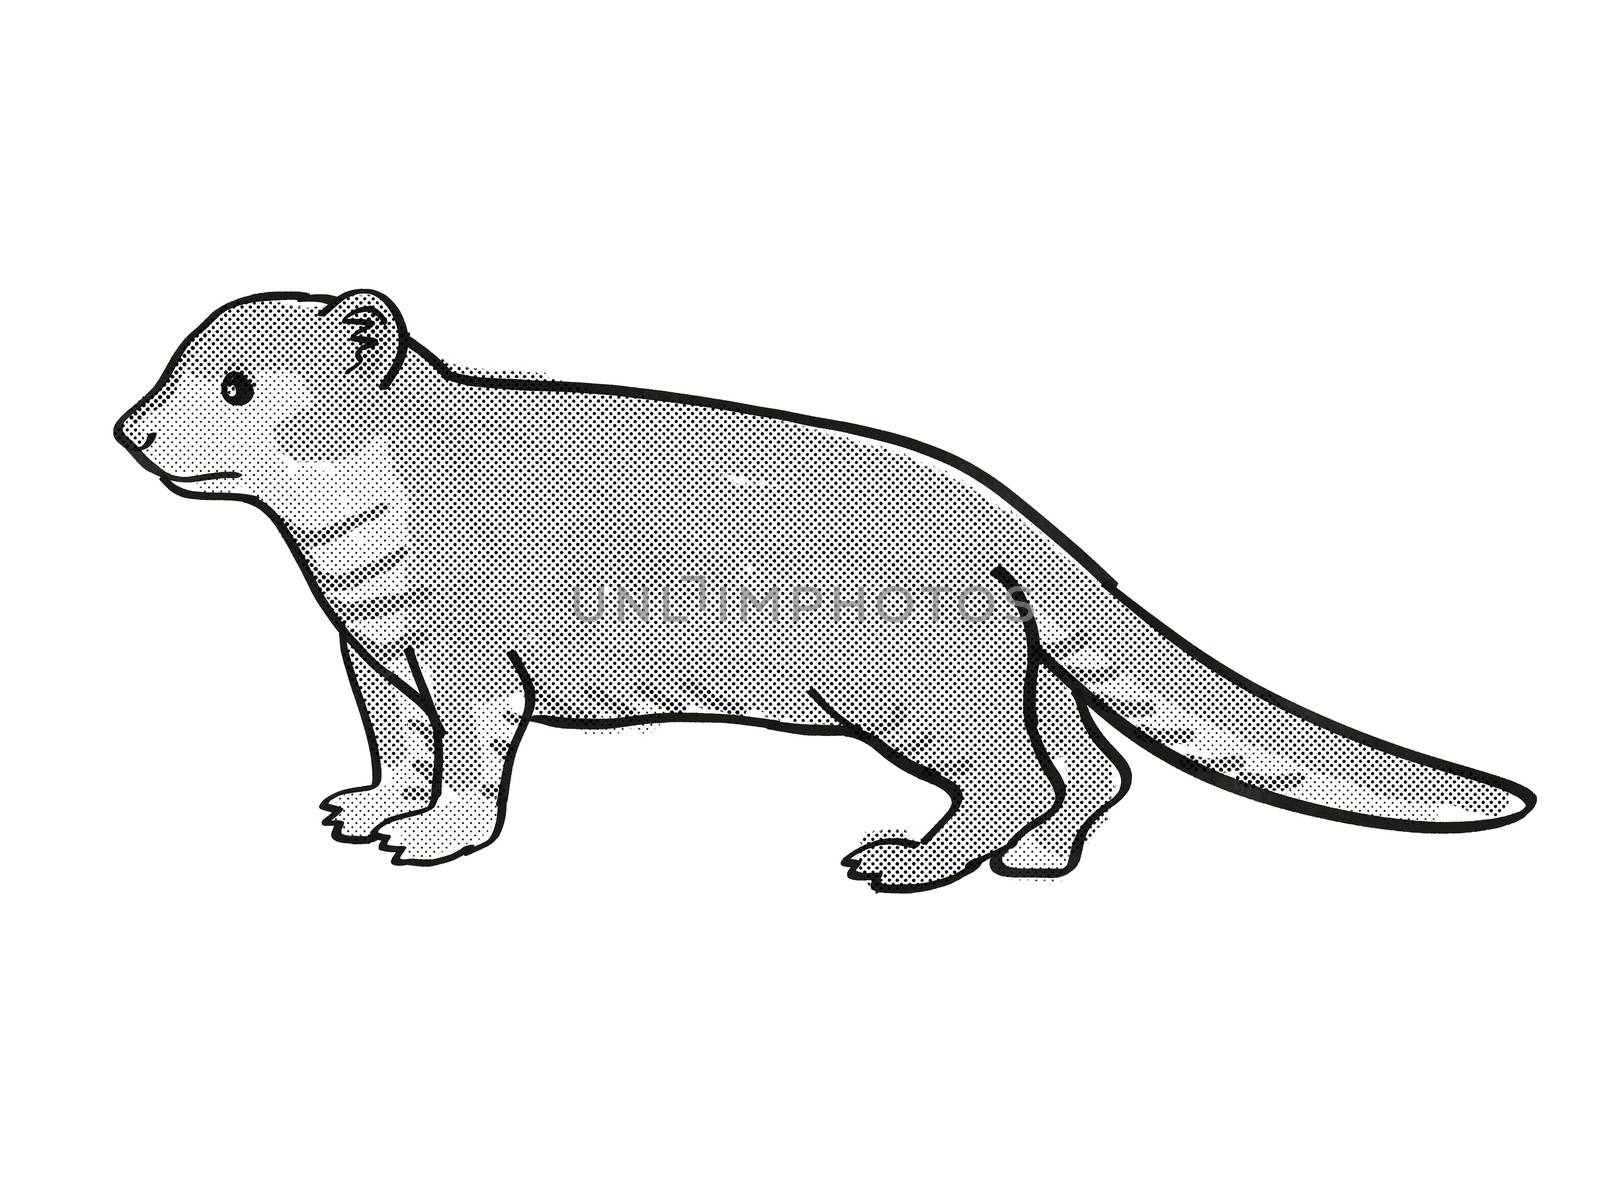 Retro cartoon mono line style drawing of a Mongoose or Helogale Parvula, an endangered wildlife species on isolated white background done in black and white full body.